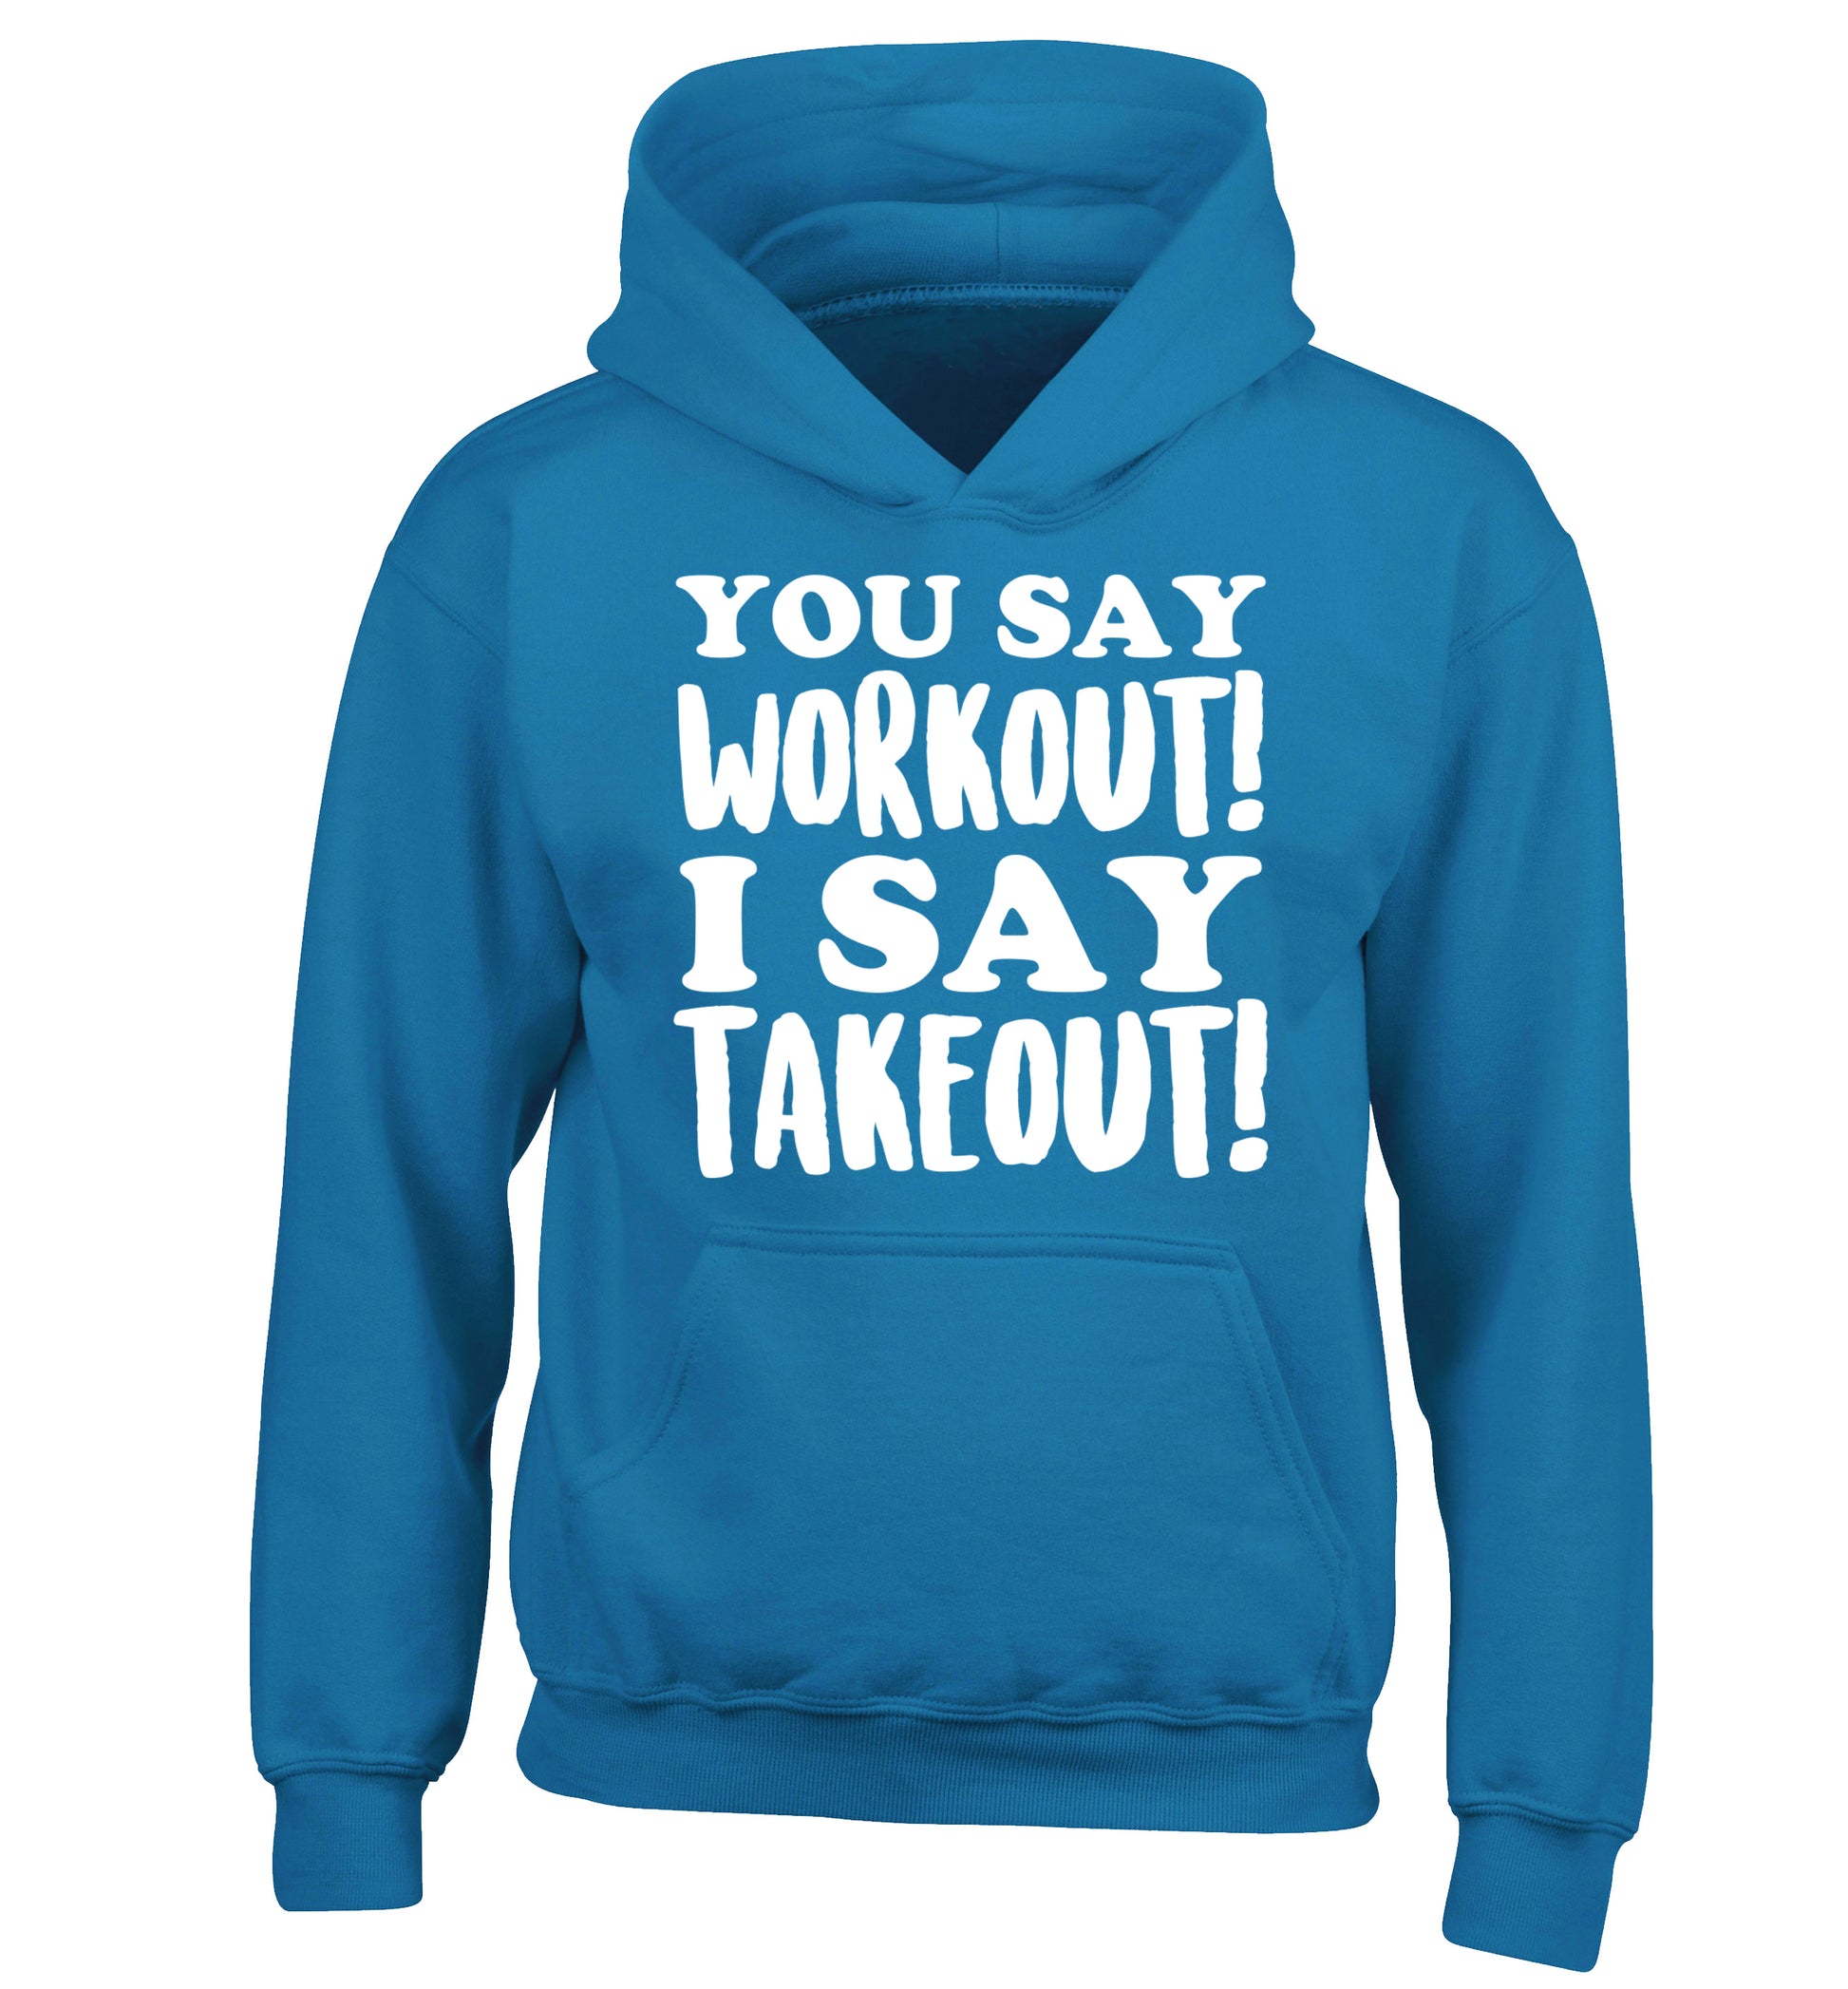 You say workout I say takeout! children's blue hoodie 12-14 Years